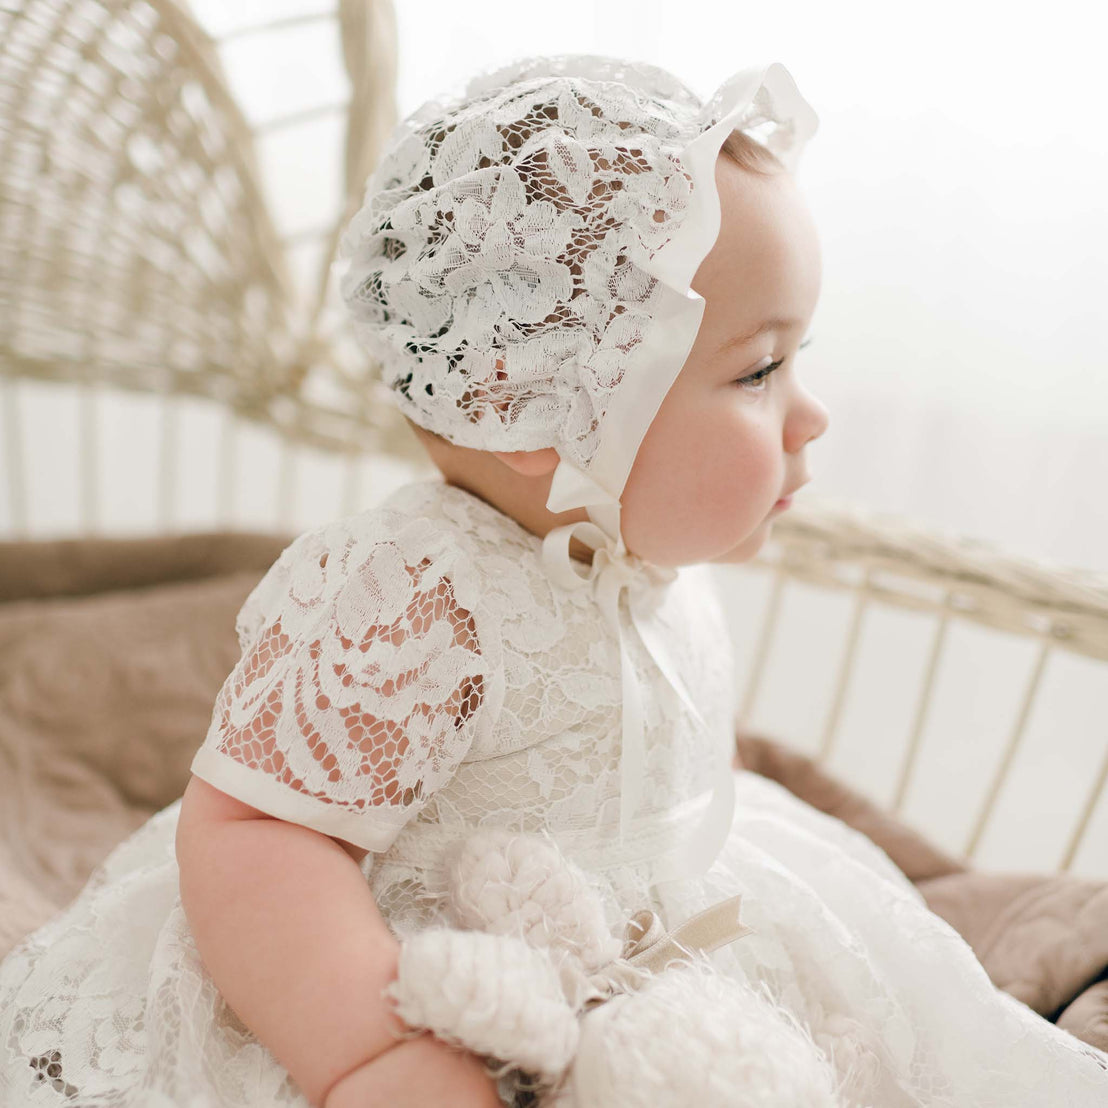 A baby wearing the Rose Christening Gown & Bonnet sits in a wicker basket, gazing to the side with a soft expression.